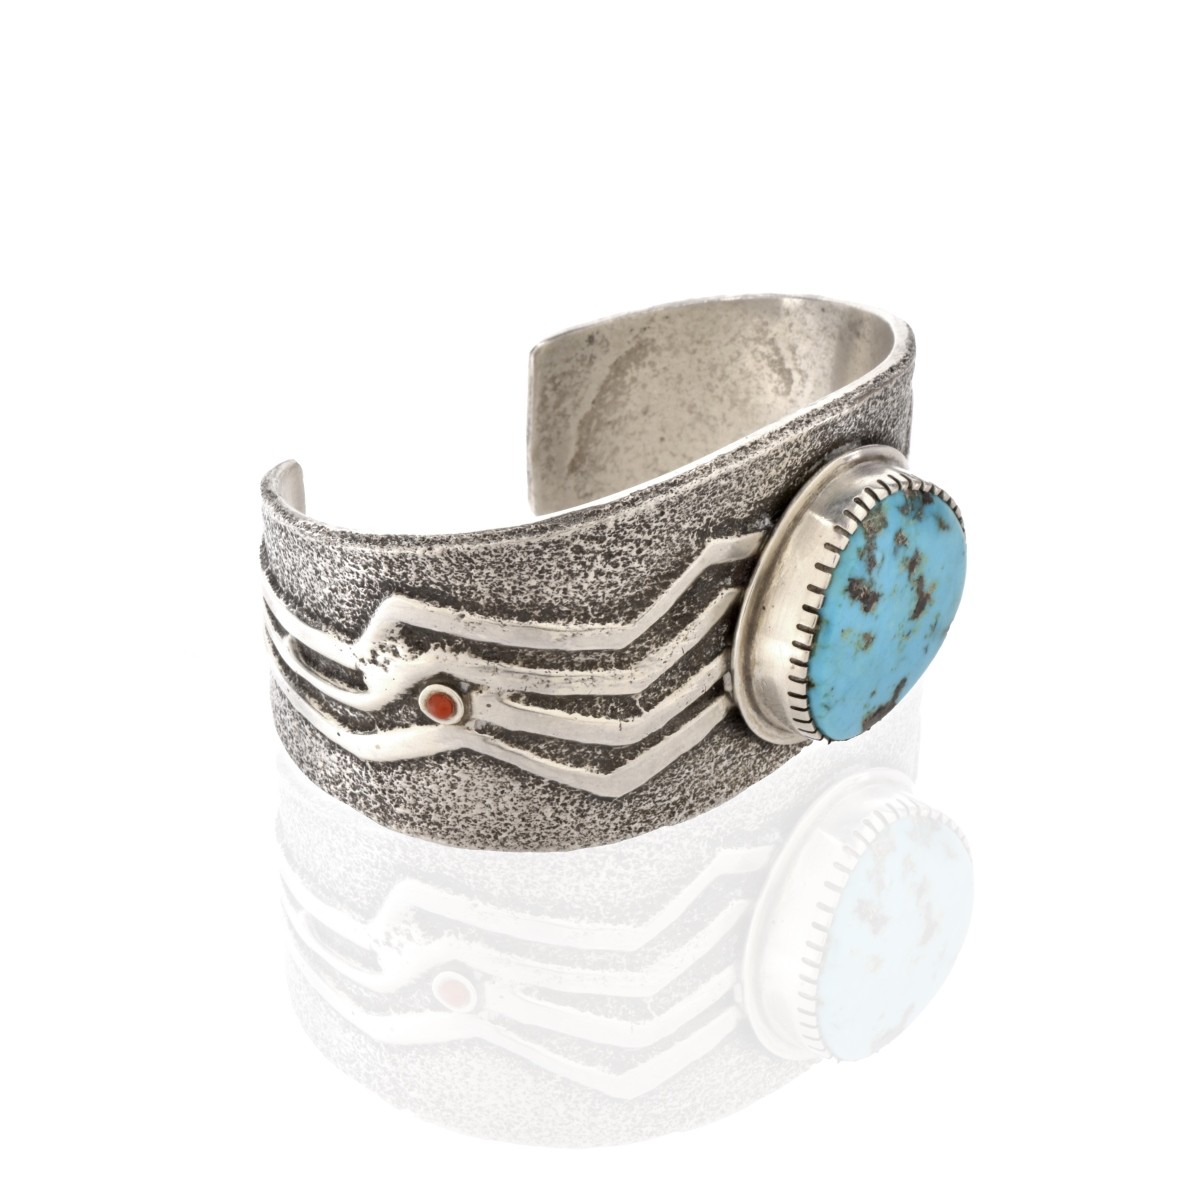 Robt. Sorrell Silver and Turquoise Bracelet